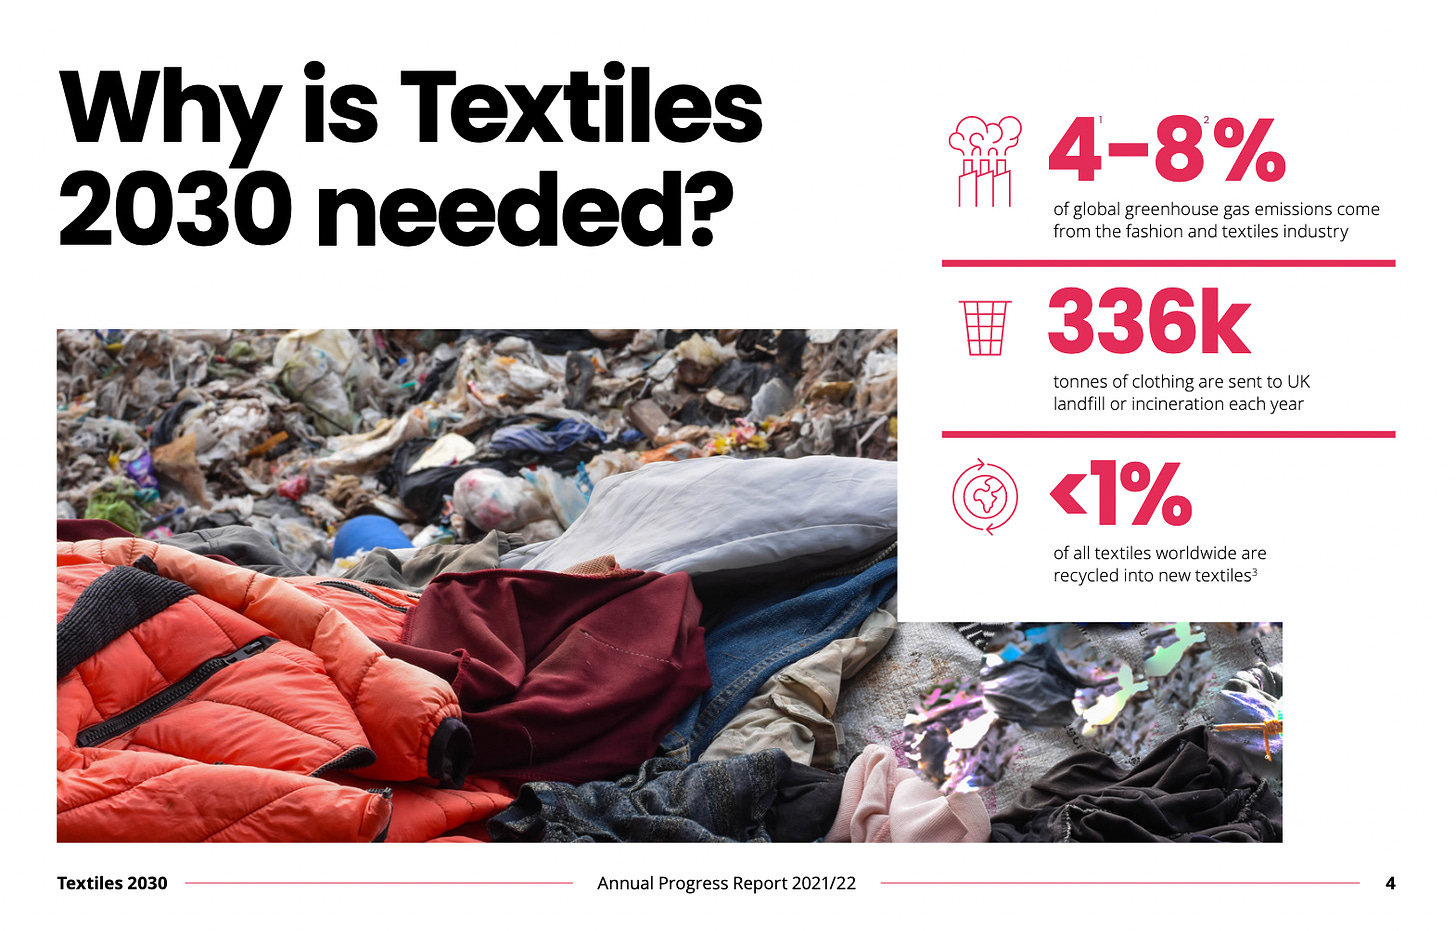 Why is Textiles 2030 needed? Annual Progress Report 2021/22 page 4 showing statistics around textile waste including ‘4–8% of global GHG emissions come from the fashion and textiles industry’, ‘336k tonnes of clothing are sent to UK landfill or incineration each year’, and ‘<1% of all textiles worldwide are recycled into new textiles’.